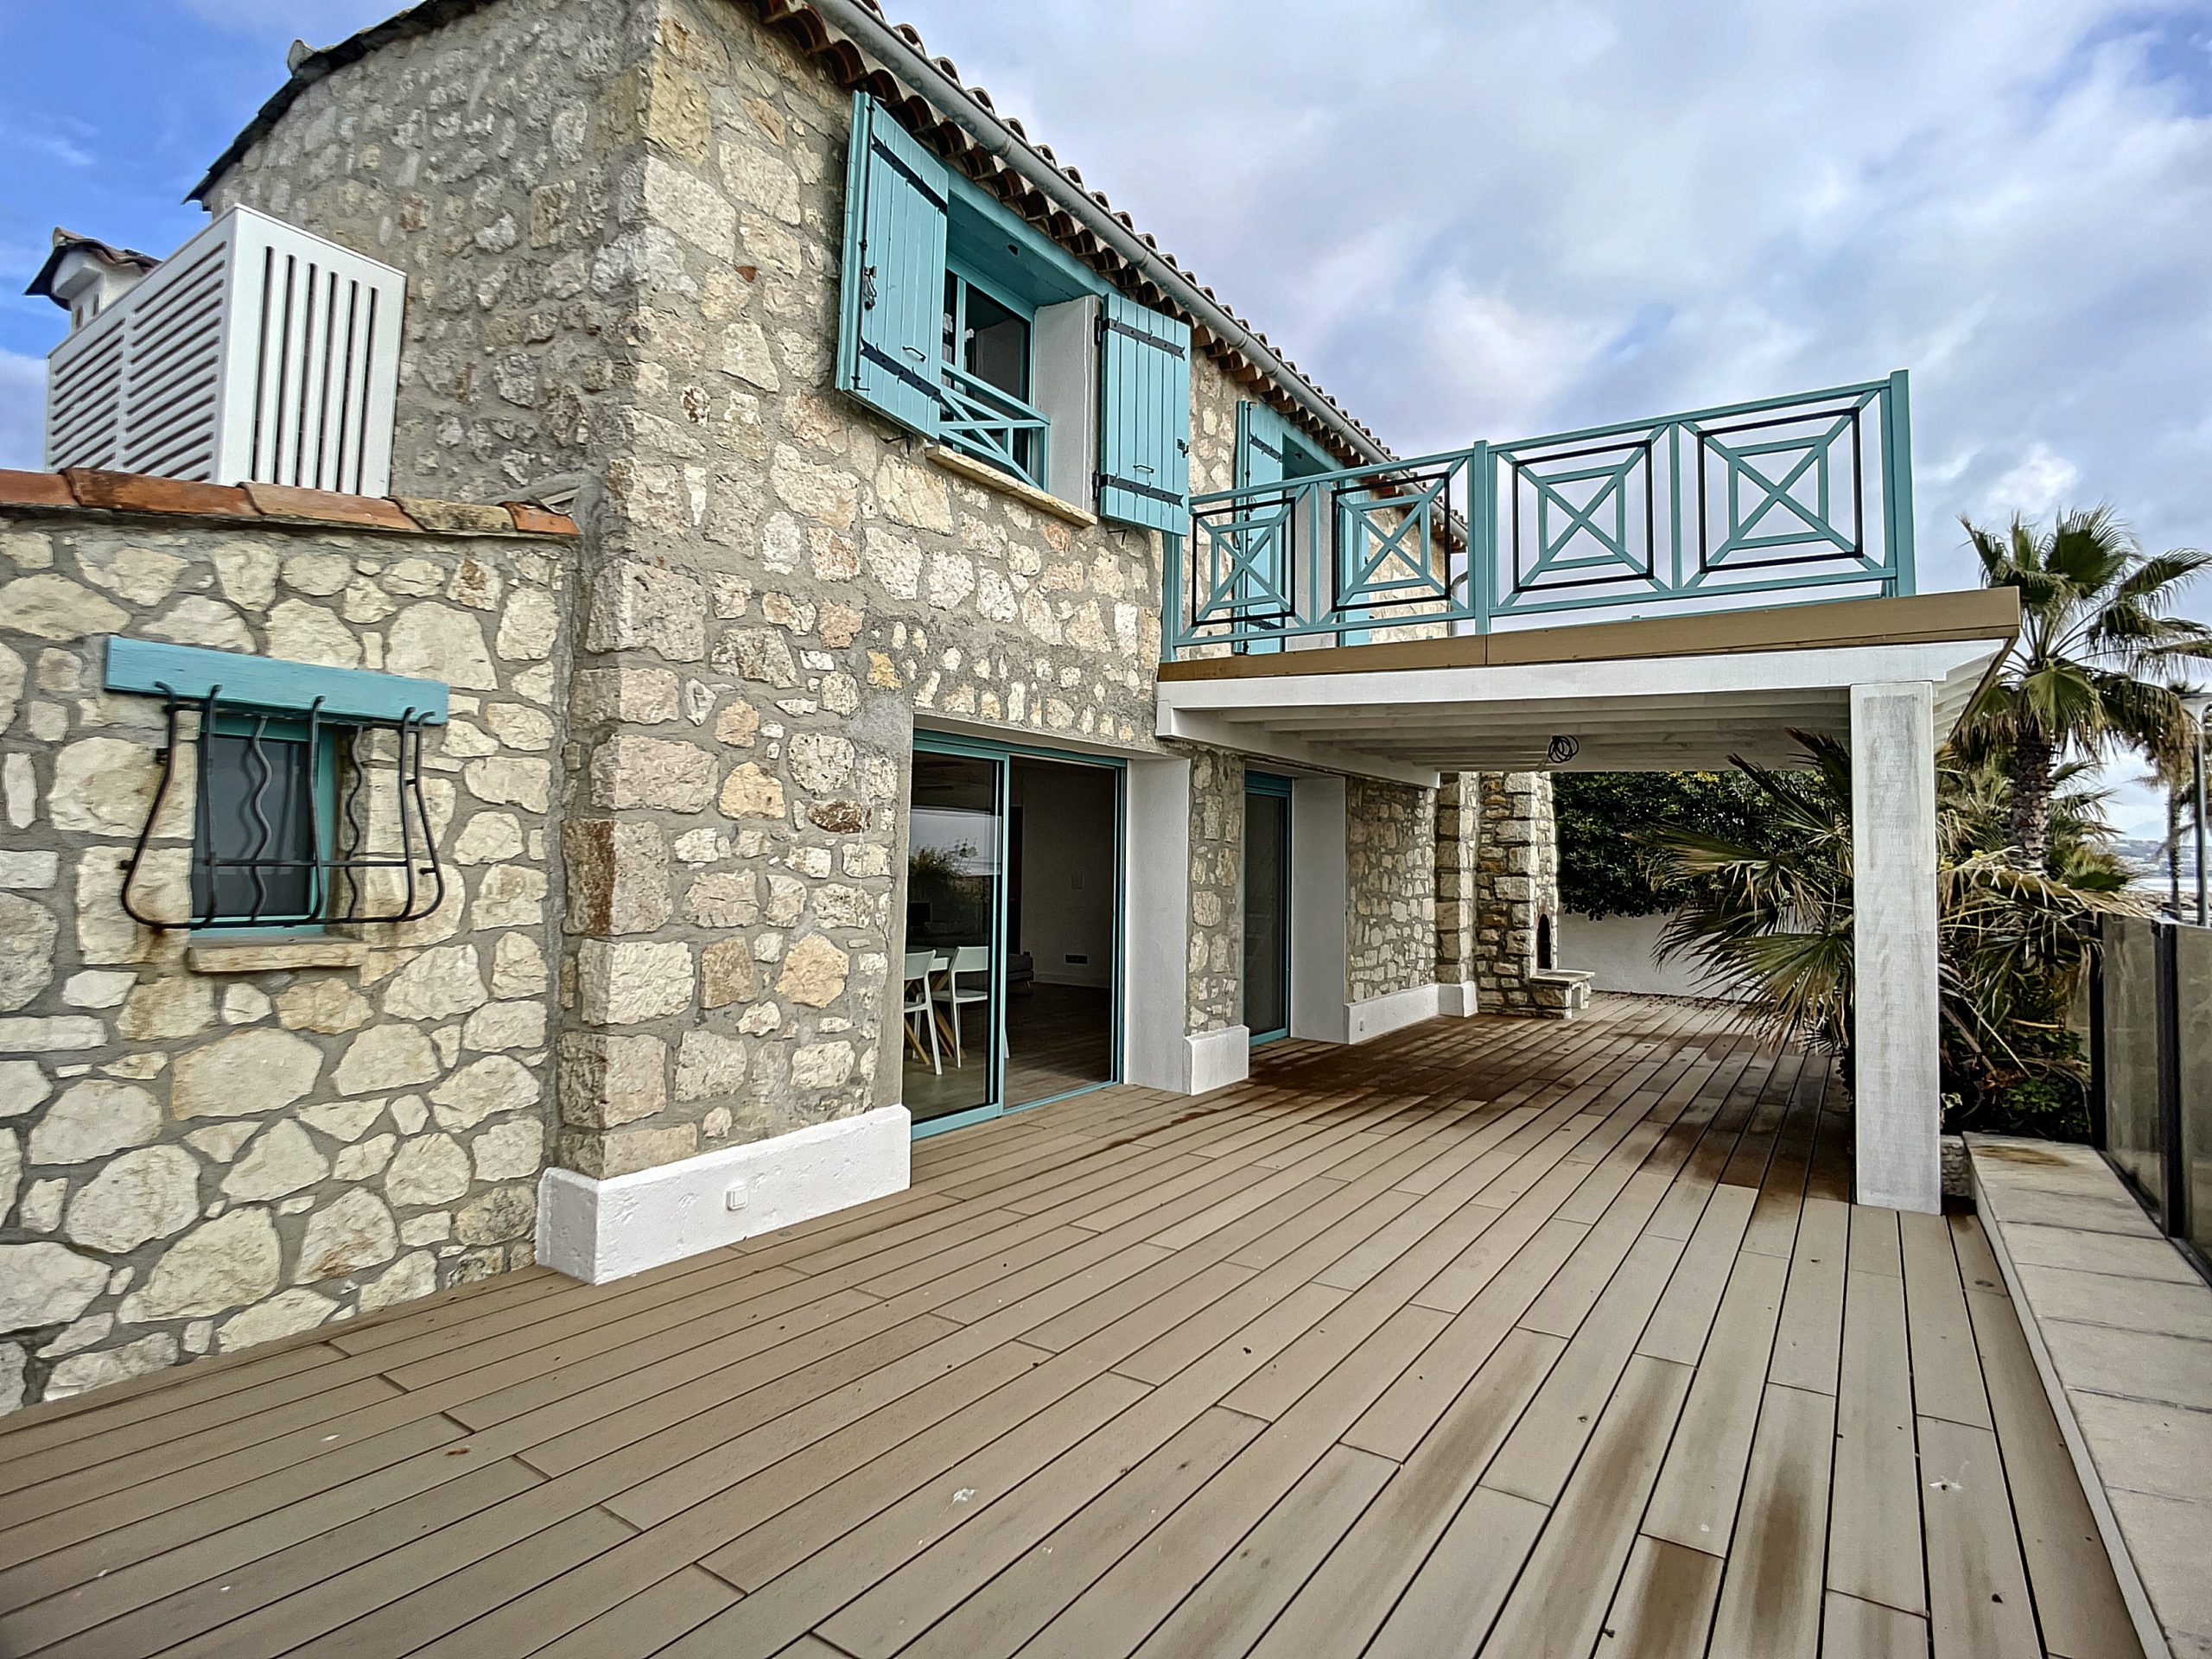 Villeneuve Loubet – House with Feet in the Water